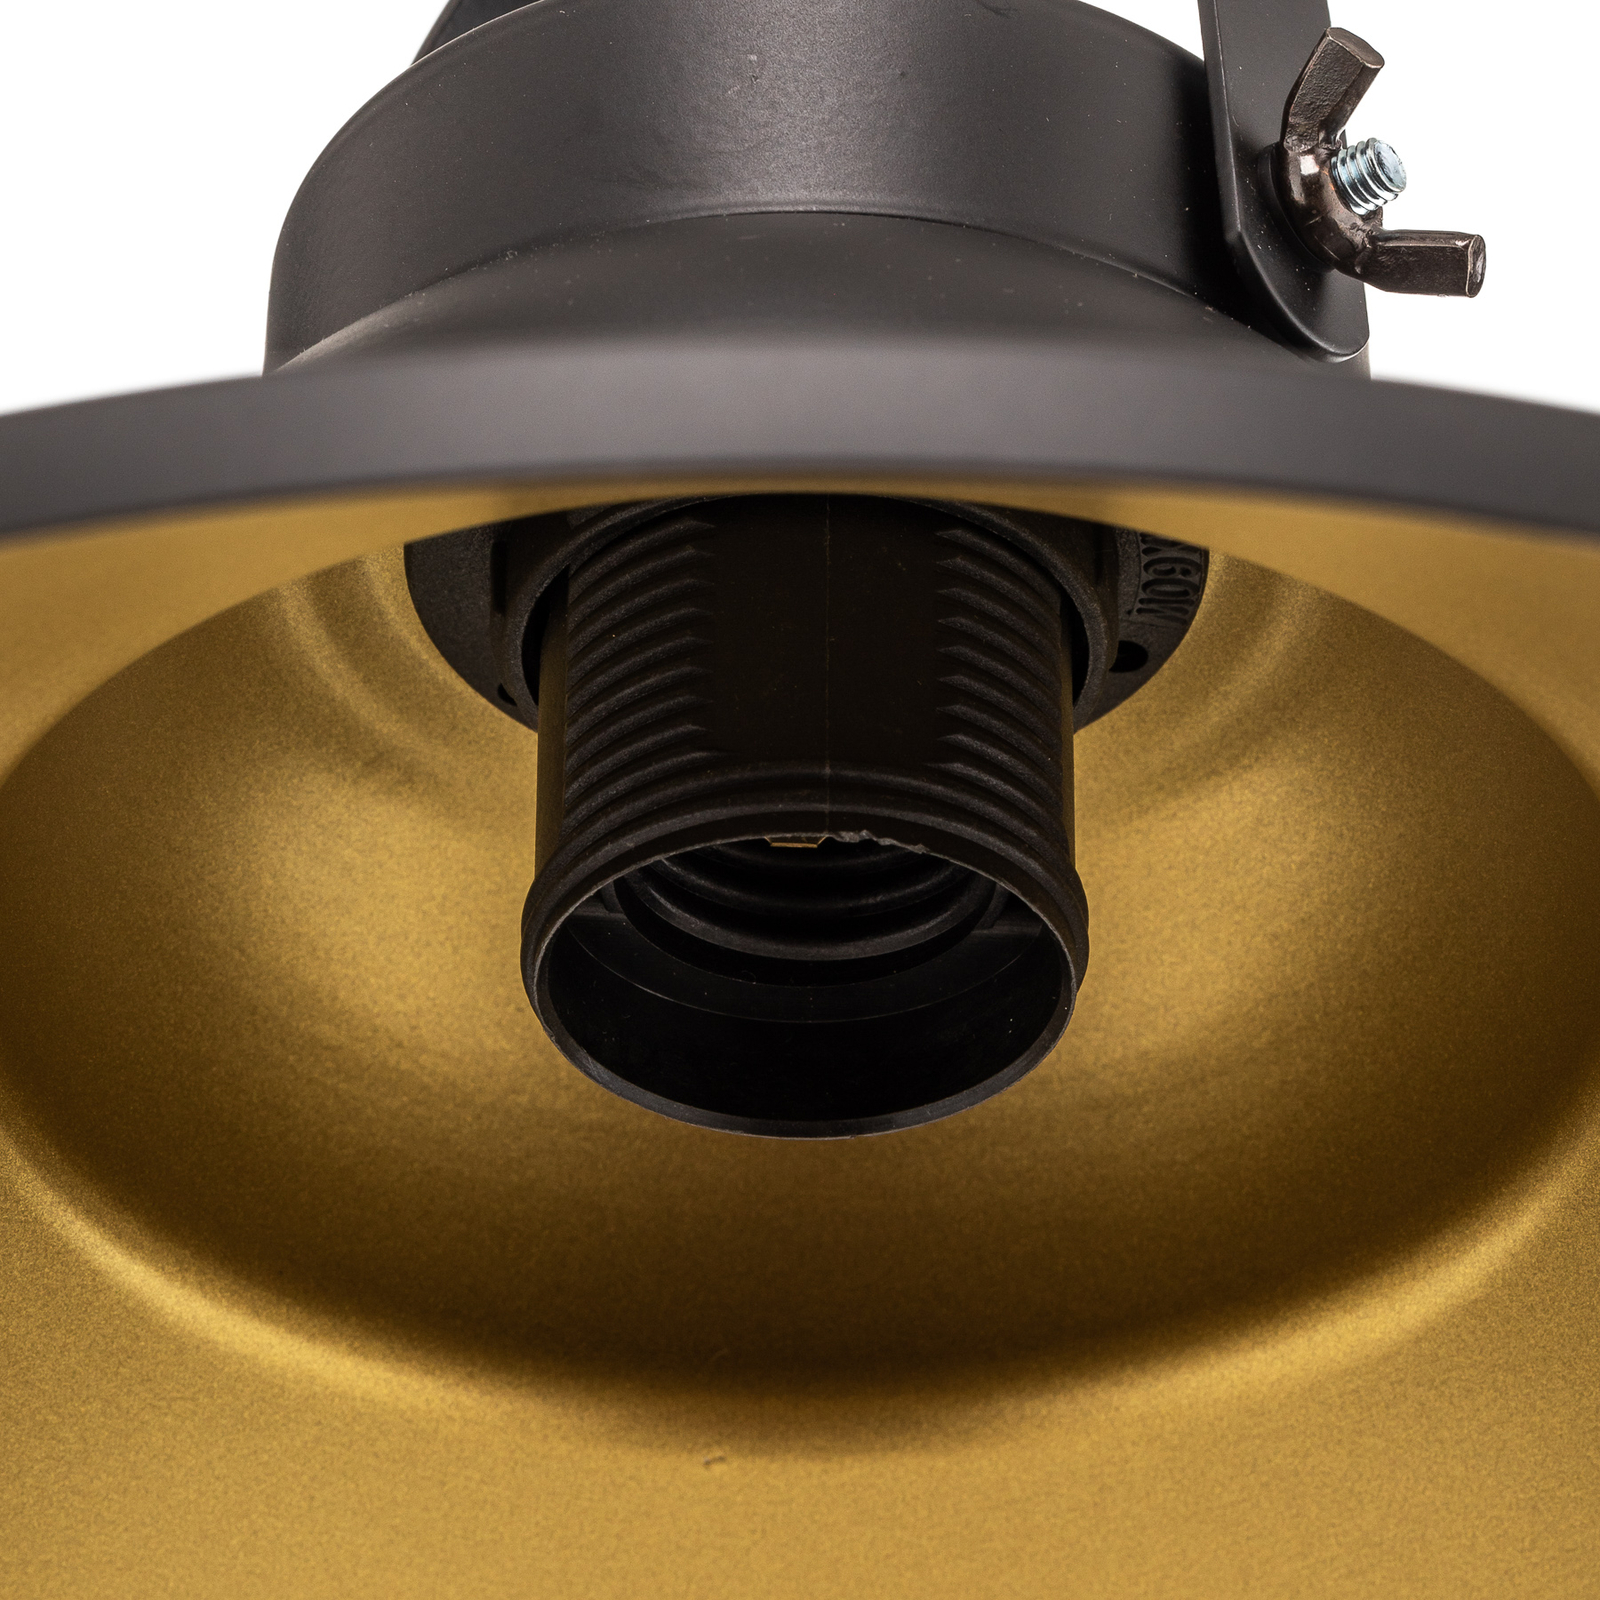 Taft pendant light with lampshade in black and gold